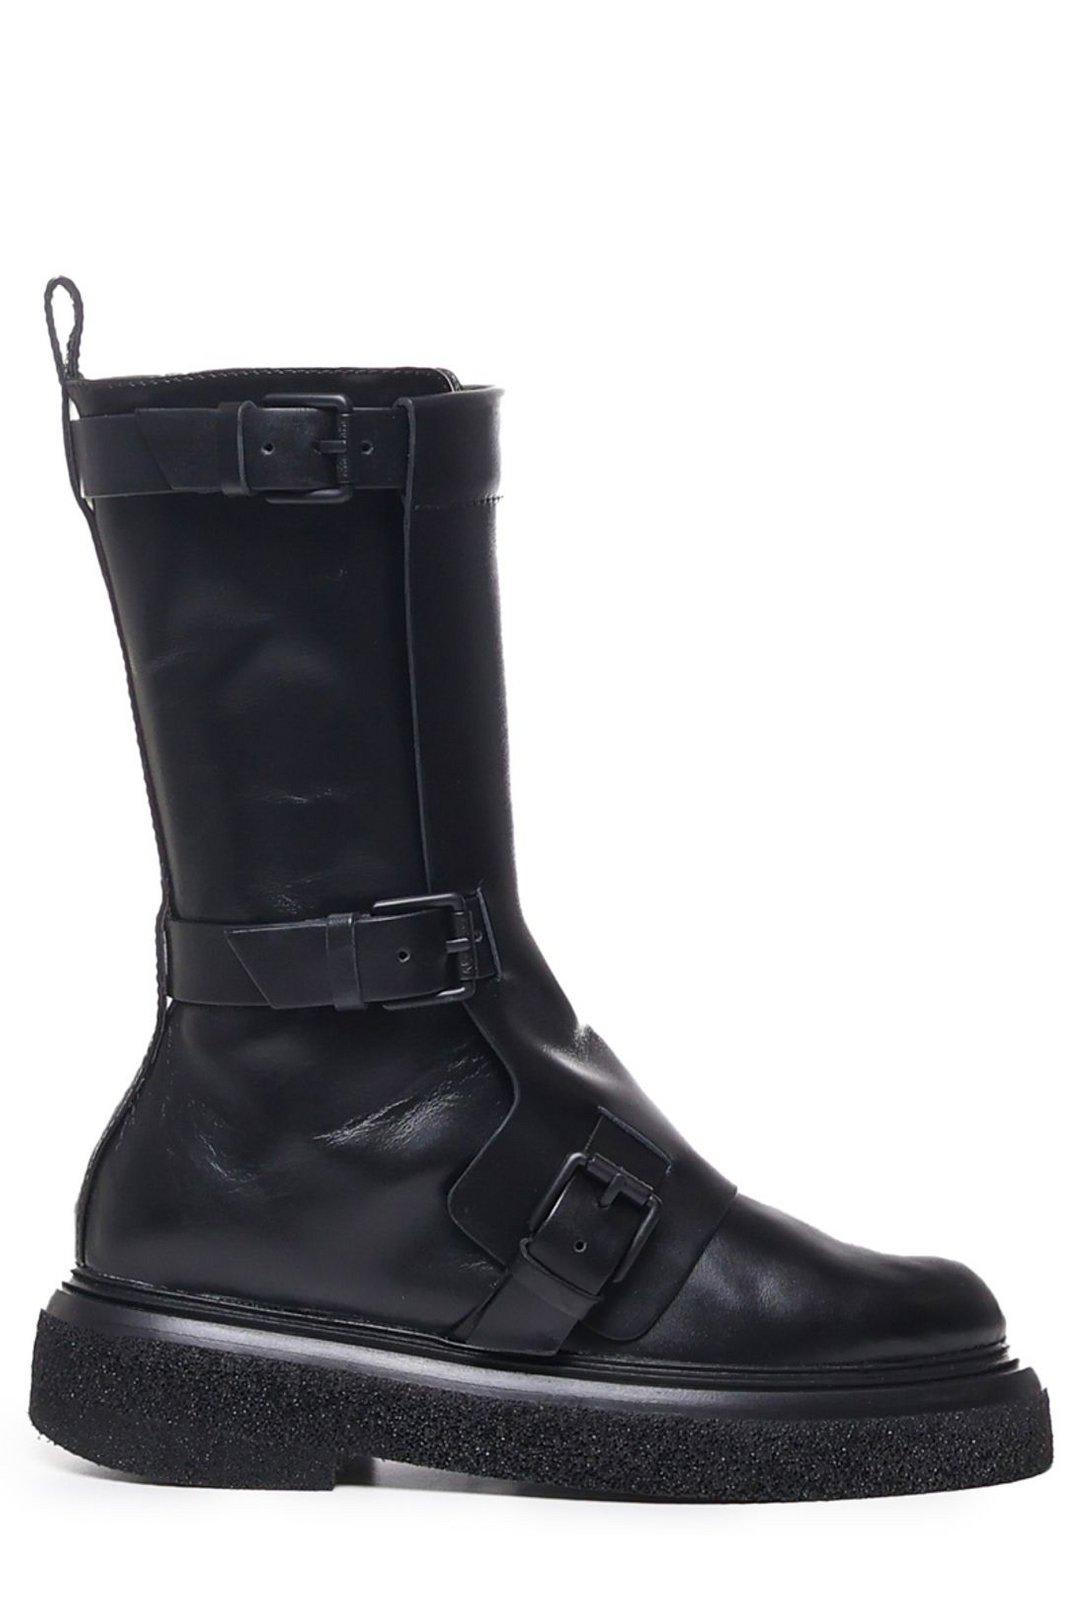 MAX MARA BUCKLED DETAILED ROUND TOE BOOTS